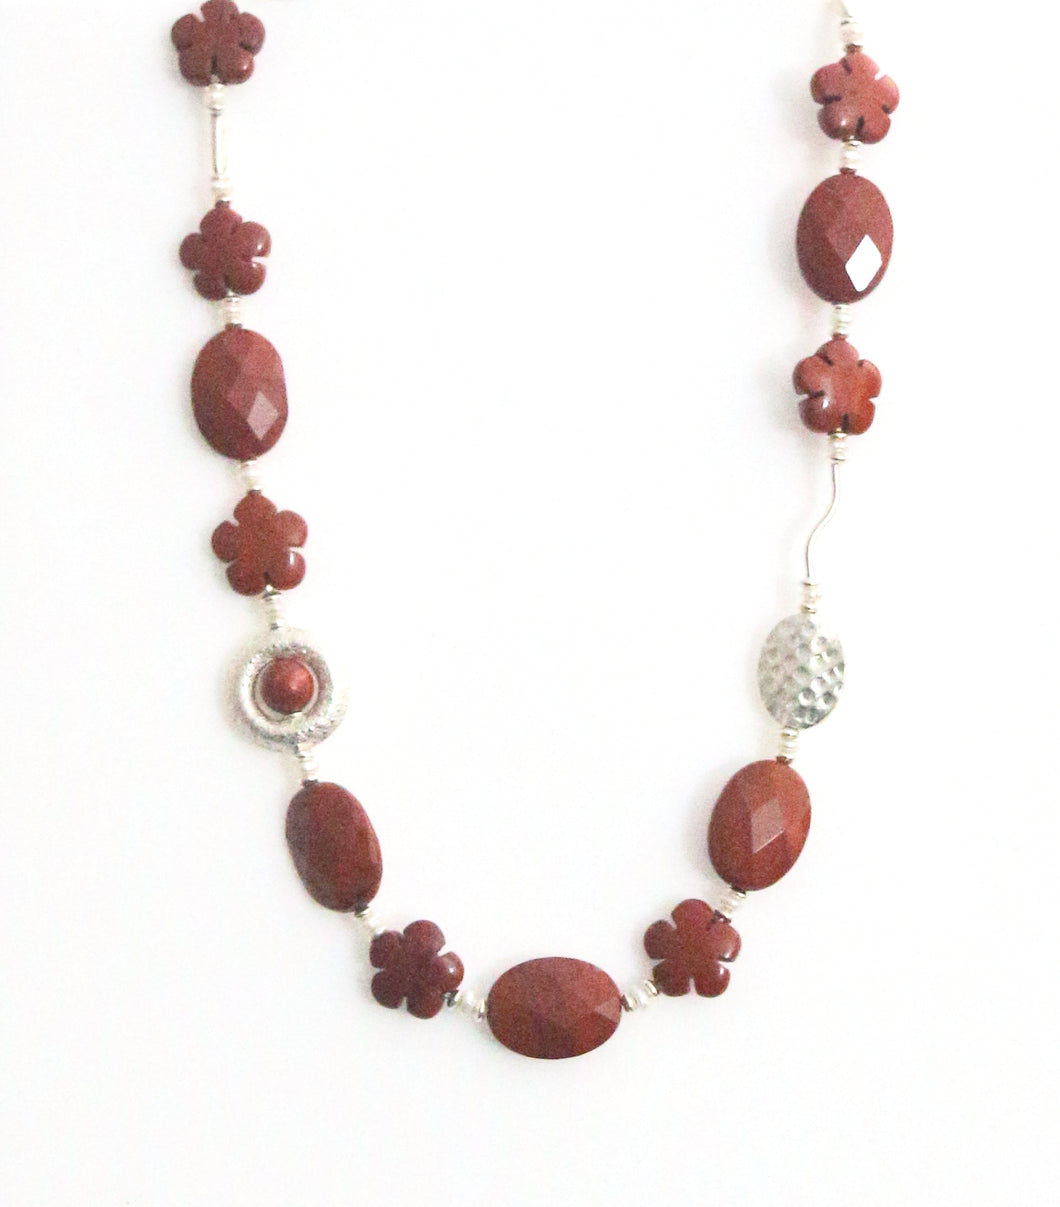 Australian Handmade Orange Necklace with Red Jasper Pearls and Sterling Silver